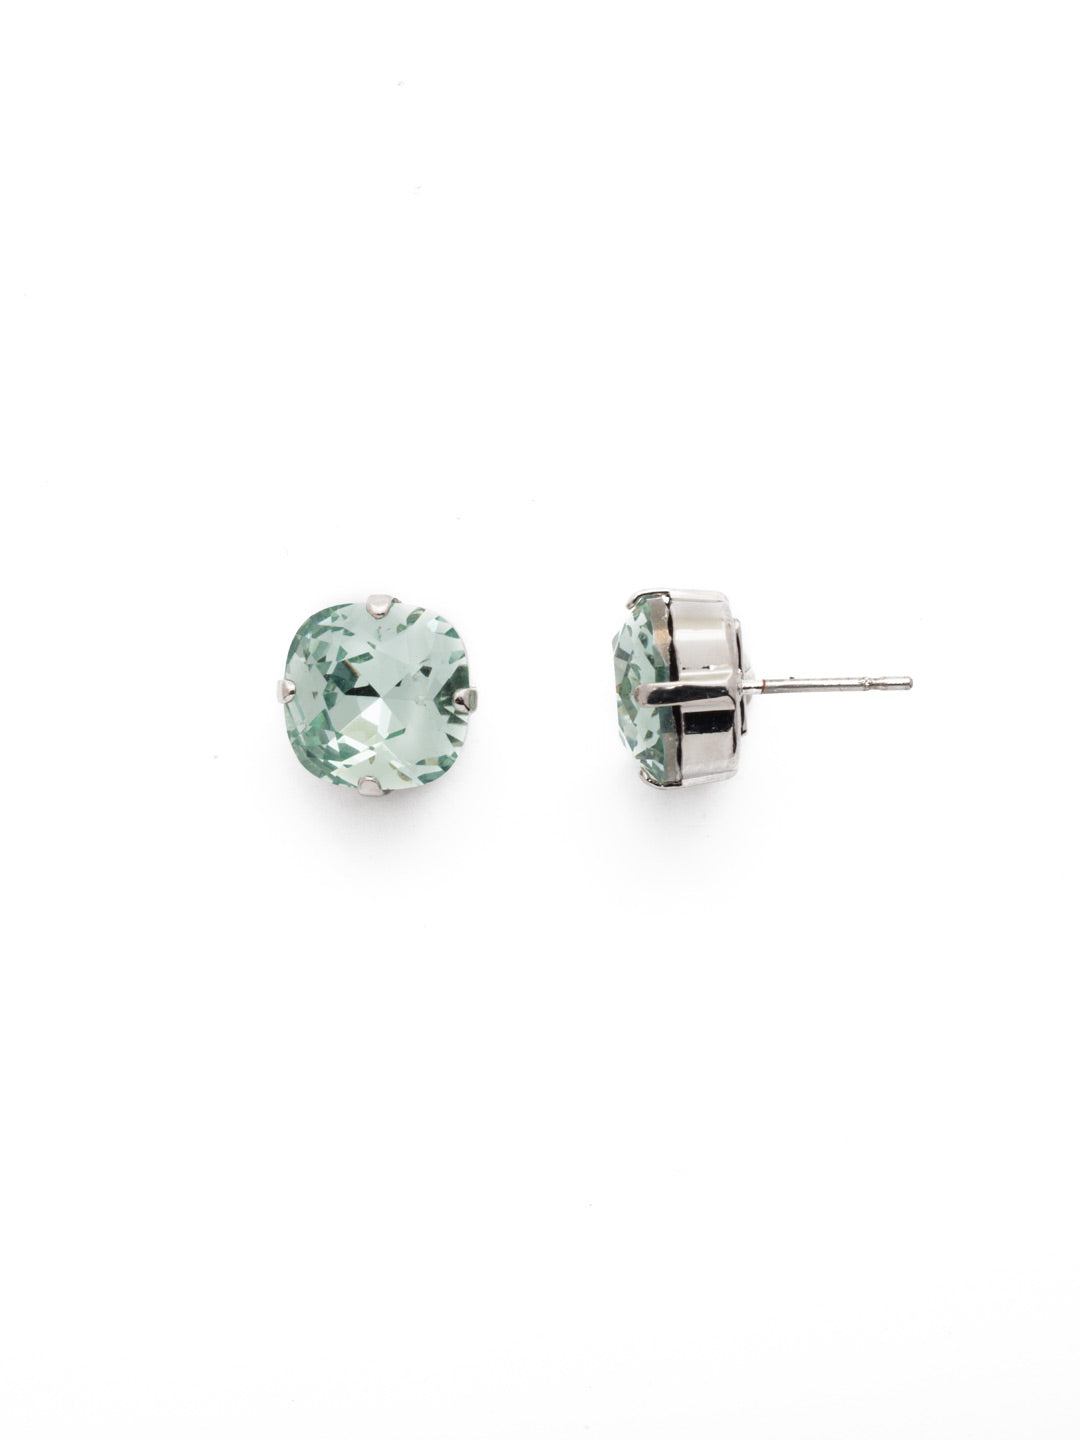 Halcyon Stud Earrings - EDH25RHMIN - A beautiful, luminous cushion-cut crystal in a classic four-pronged setting that's ideal for everyday wear. From Sorrelli's Mint collection in our Palladium Silver-tone finish.